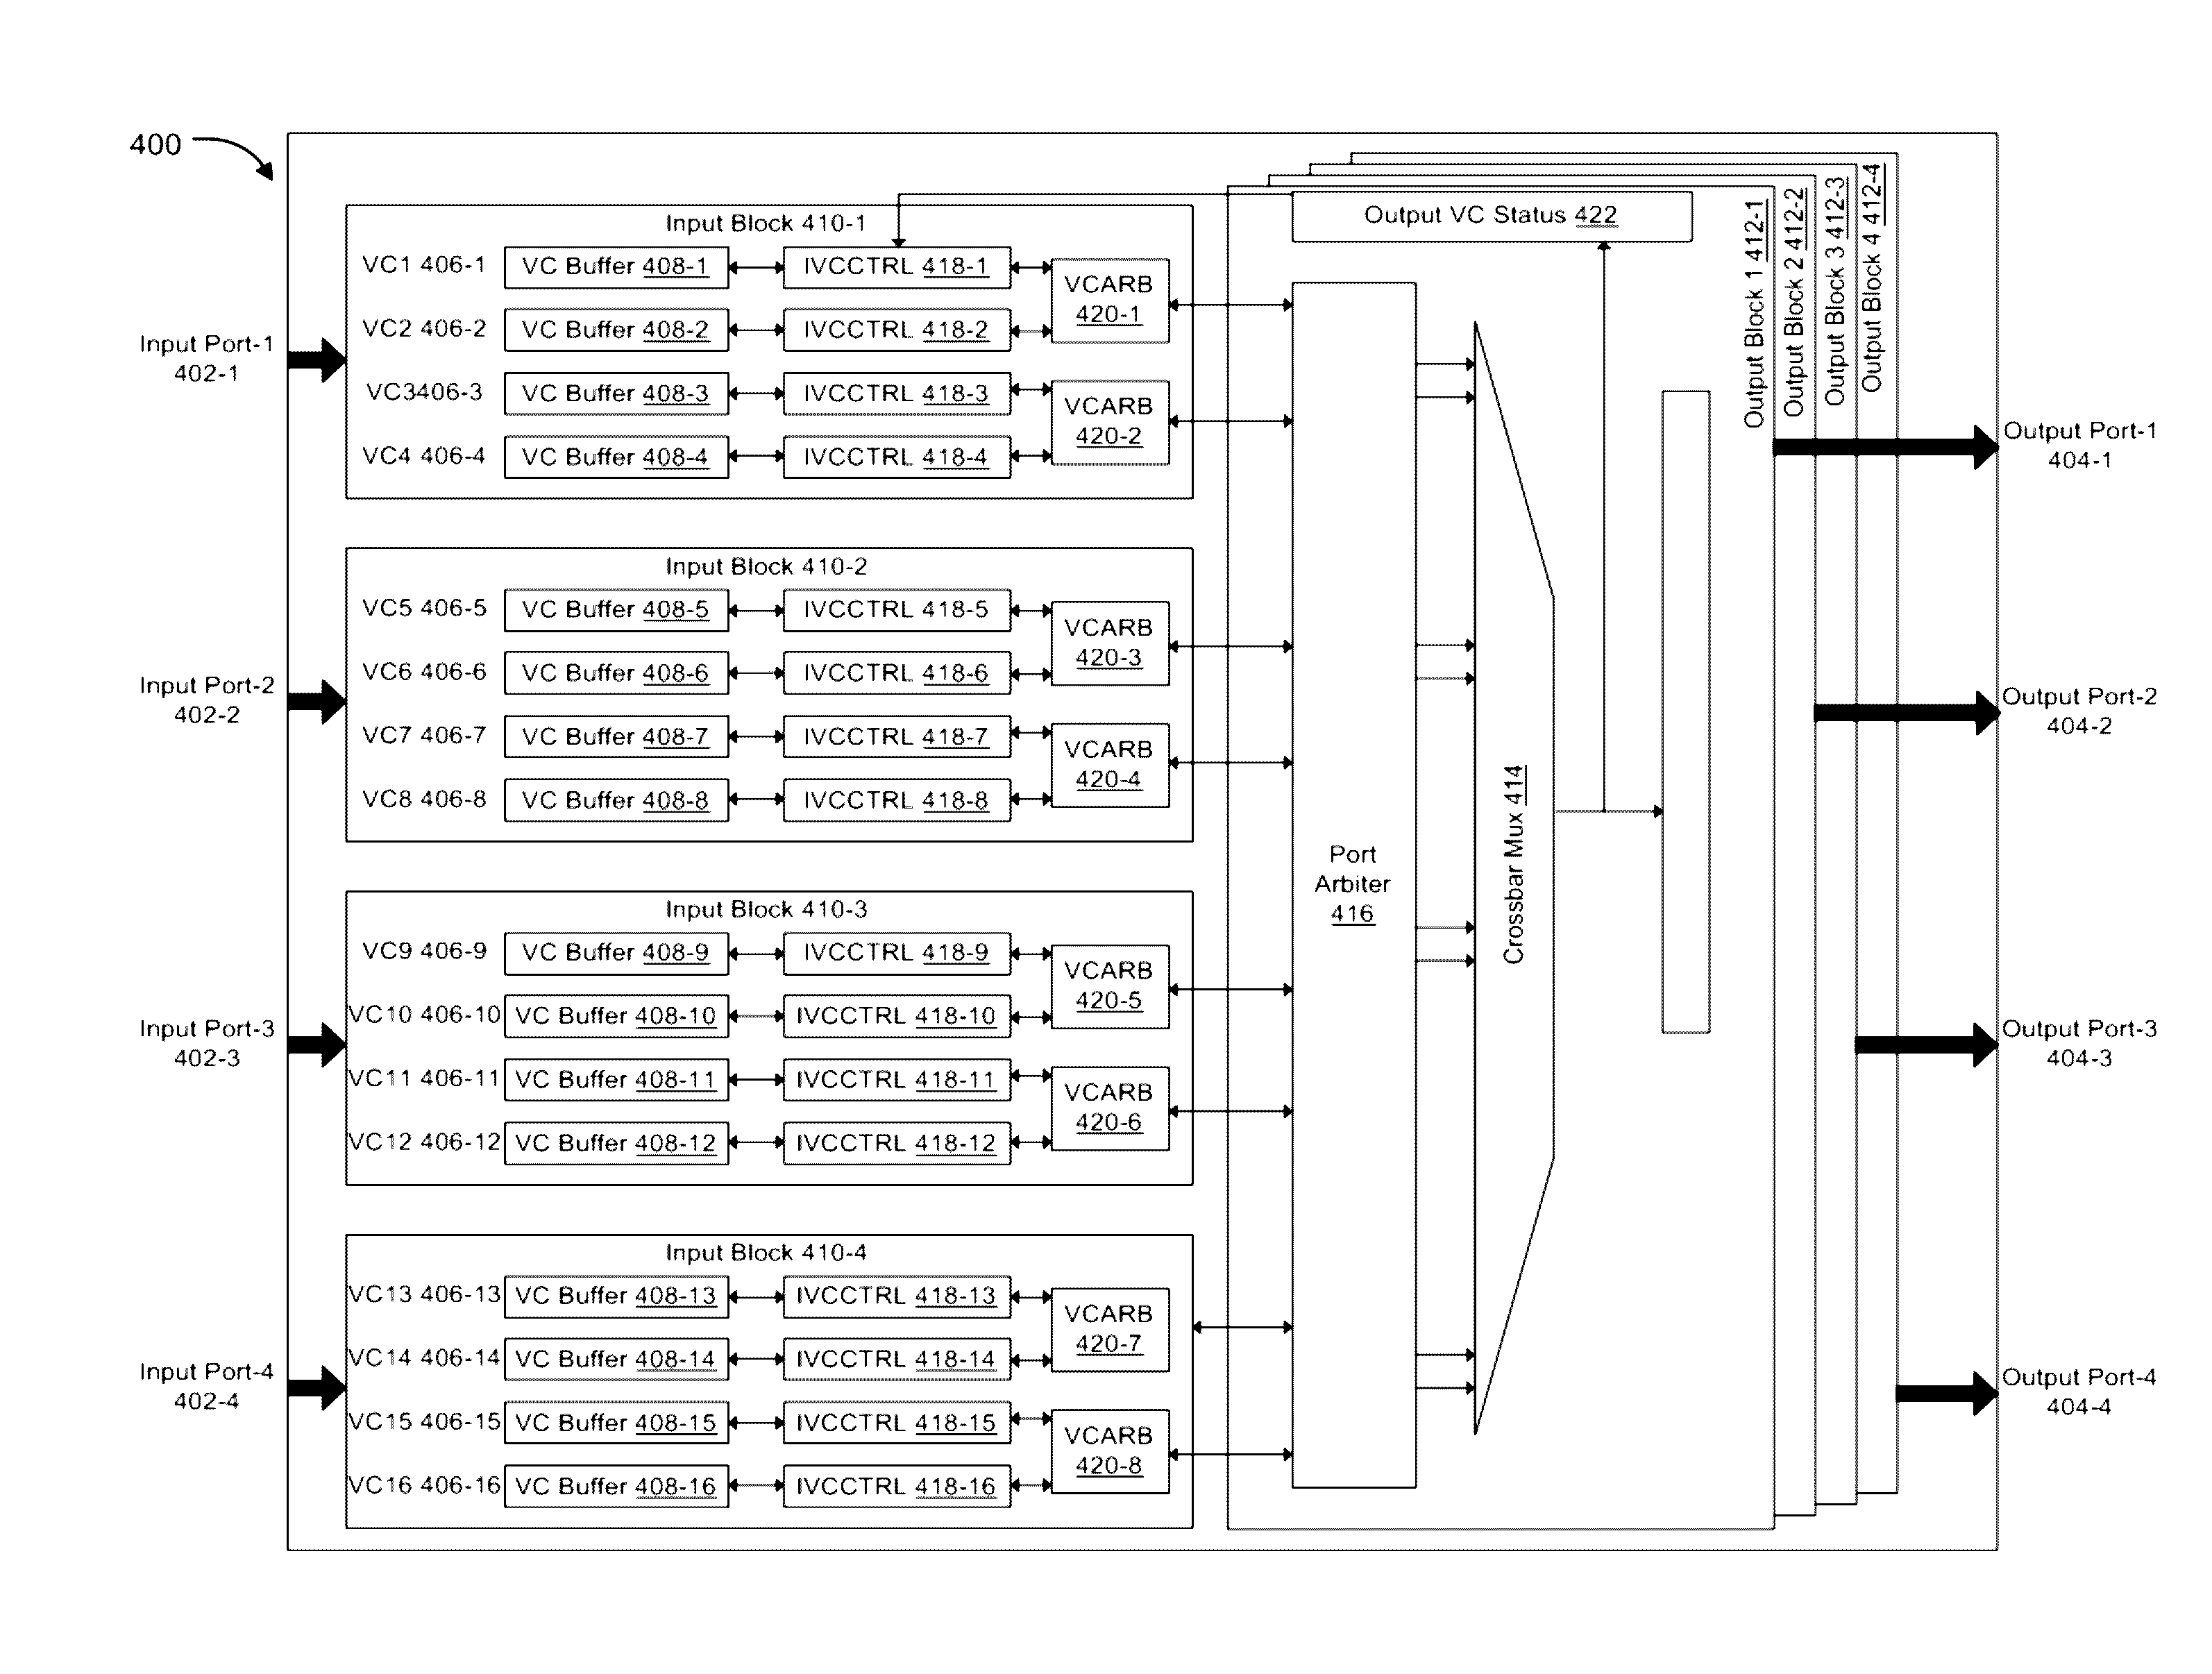 Configurable router for a network on chip (NOC)